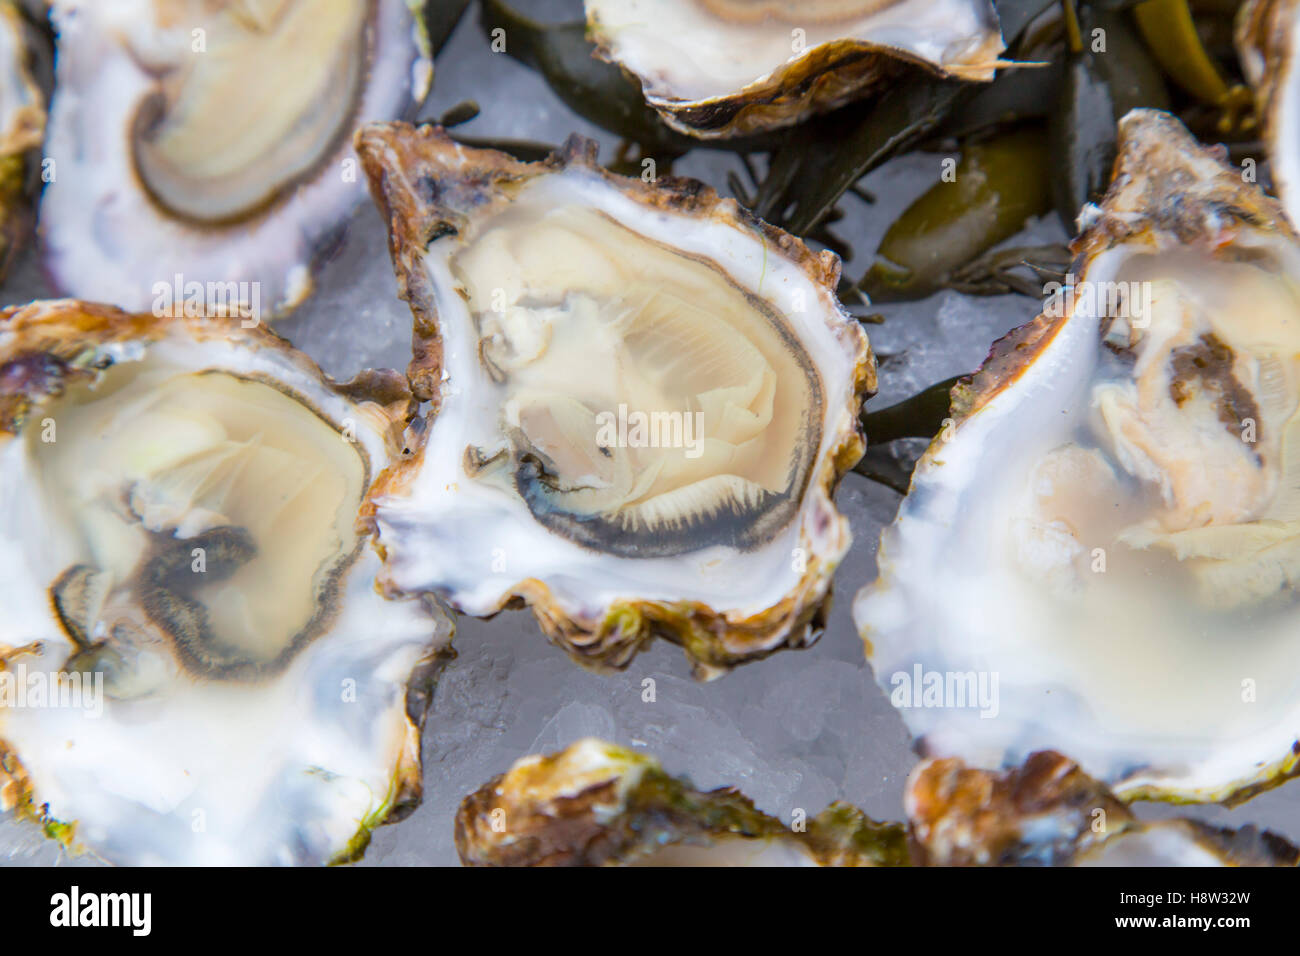 Oysters, on ice, open, Stock Photo